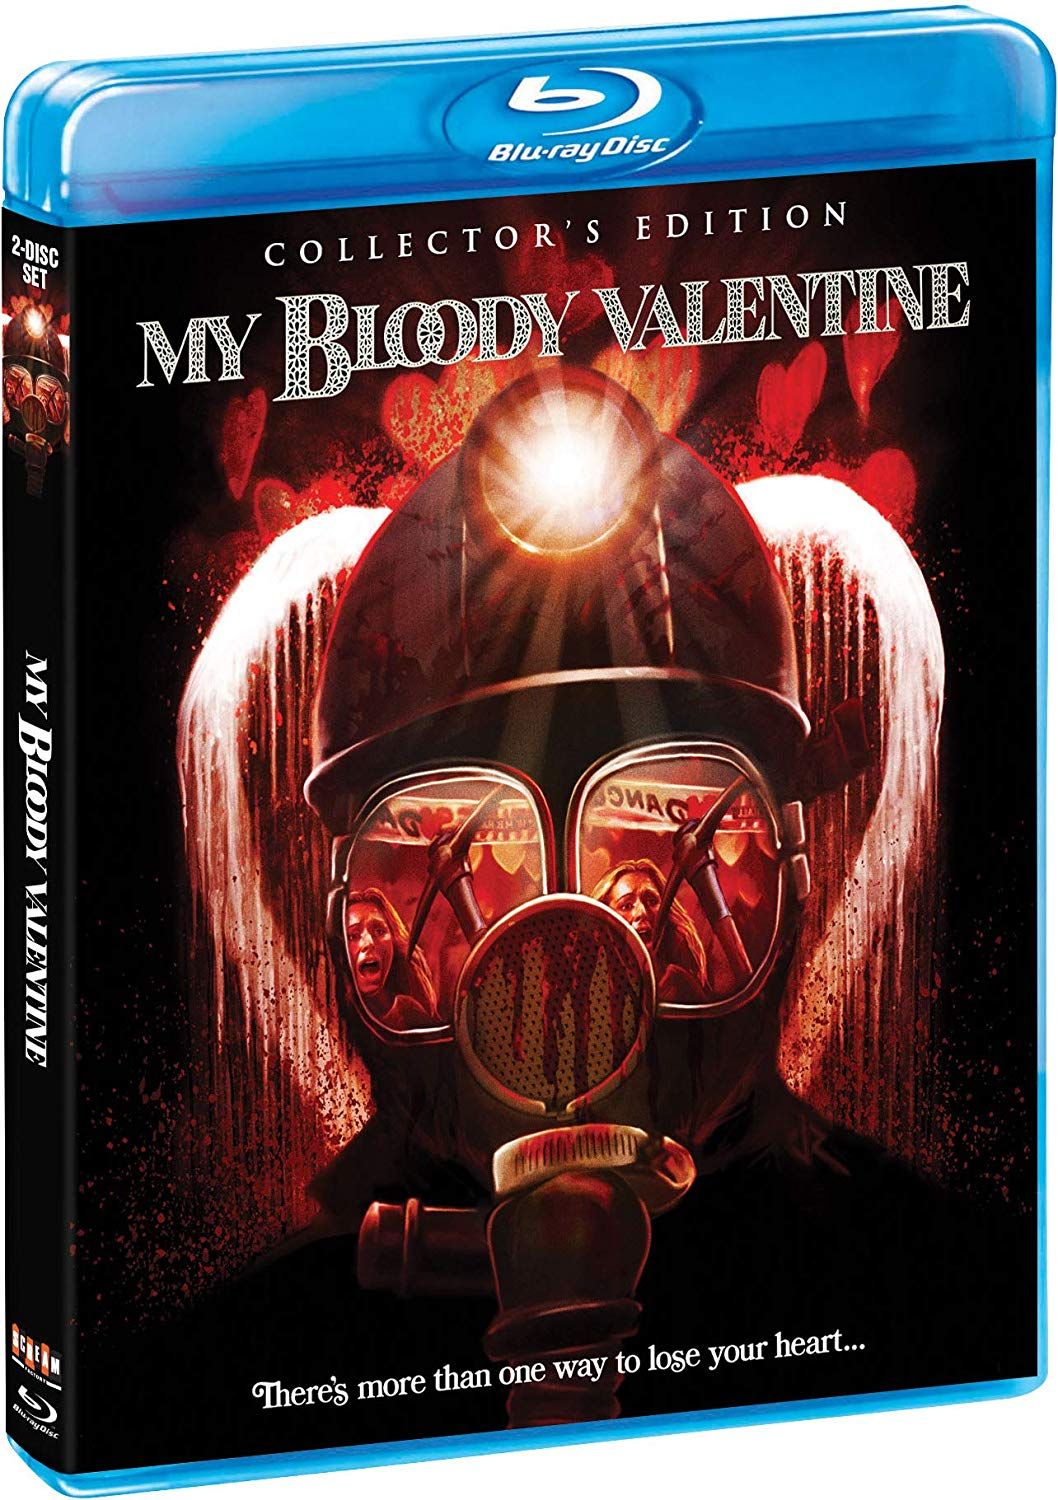 My Bloody Valentine 1981 Collector's Edition Blu-ray Scream Factory